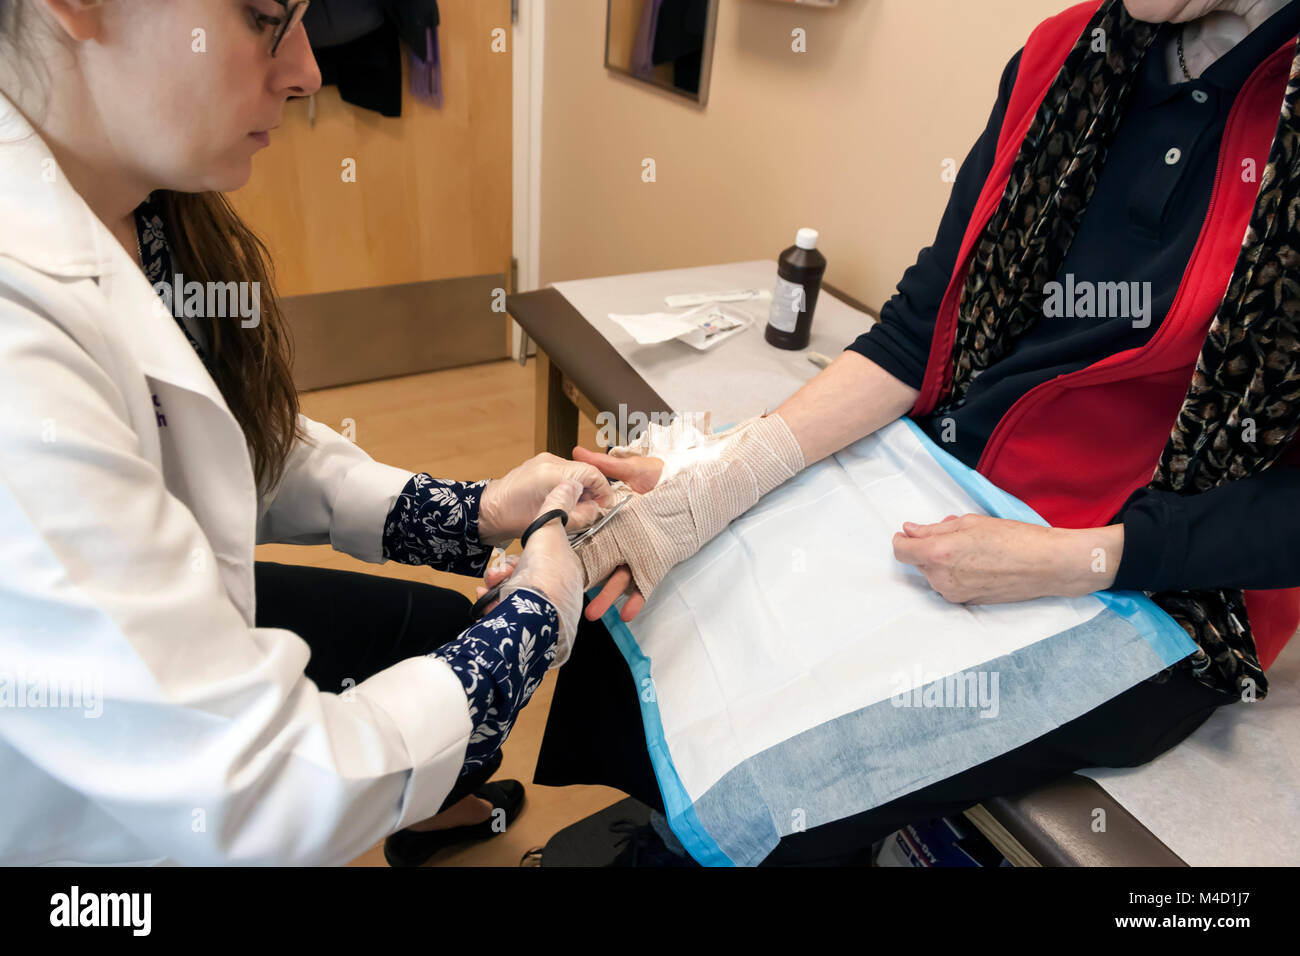 Doctor's assistant cutting & removing a patient's hand bandage one month after Dupuytren's Contracture surgery. Stock Photo